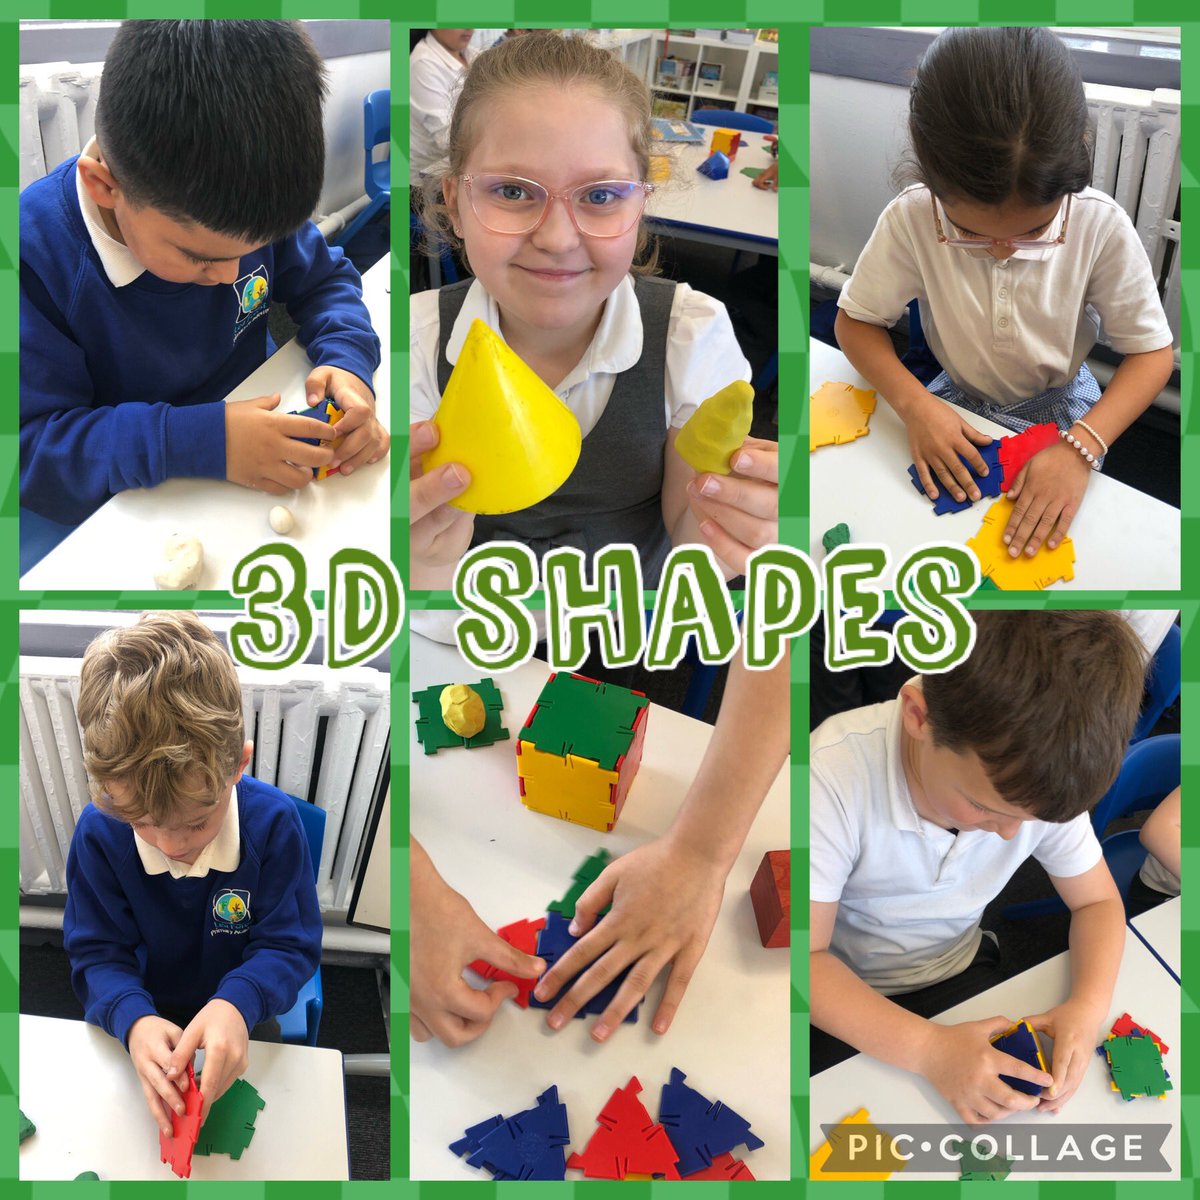 #LFP3MC have been exploring 3D Shapes today. The children used a variety of equipment to make 3D shapes. They also described the properties of the shapes. @LFP_MCollis @LFP_DHT_MrW @LFP_Dep @Lea_Forest_HT @lea_forest_aet @lea_forest_curr @BirminghamEdu